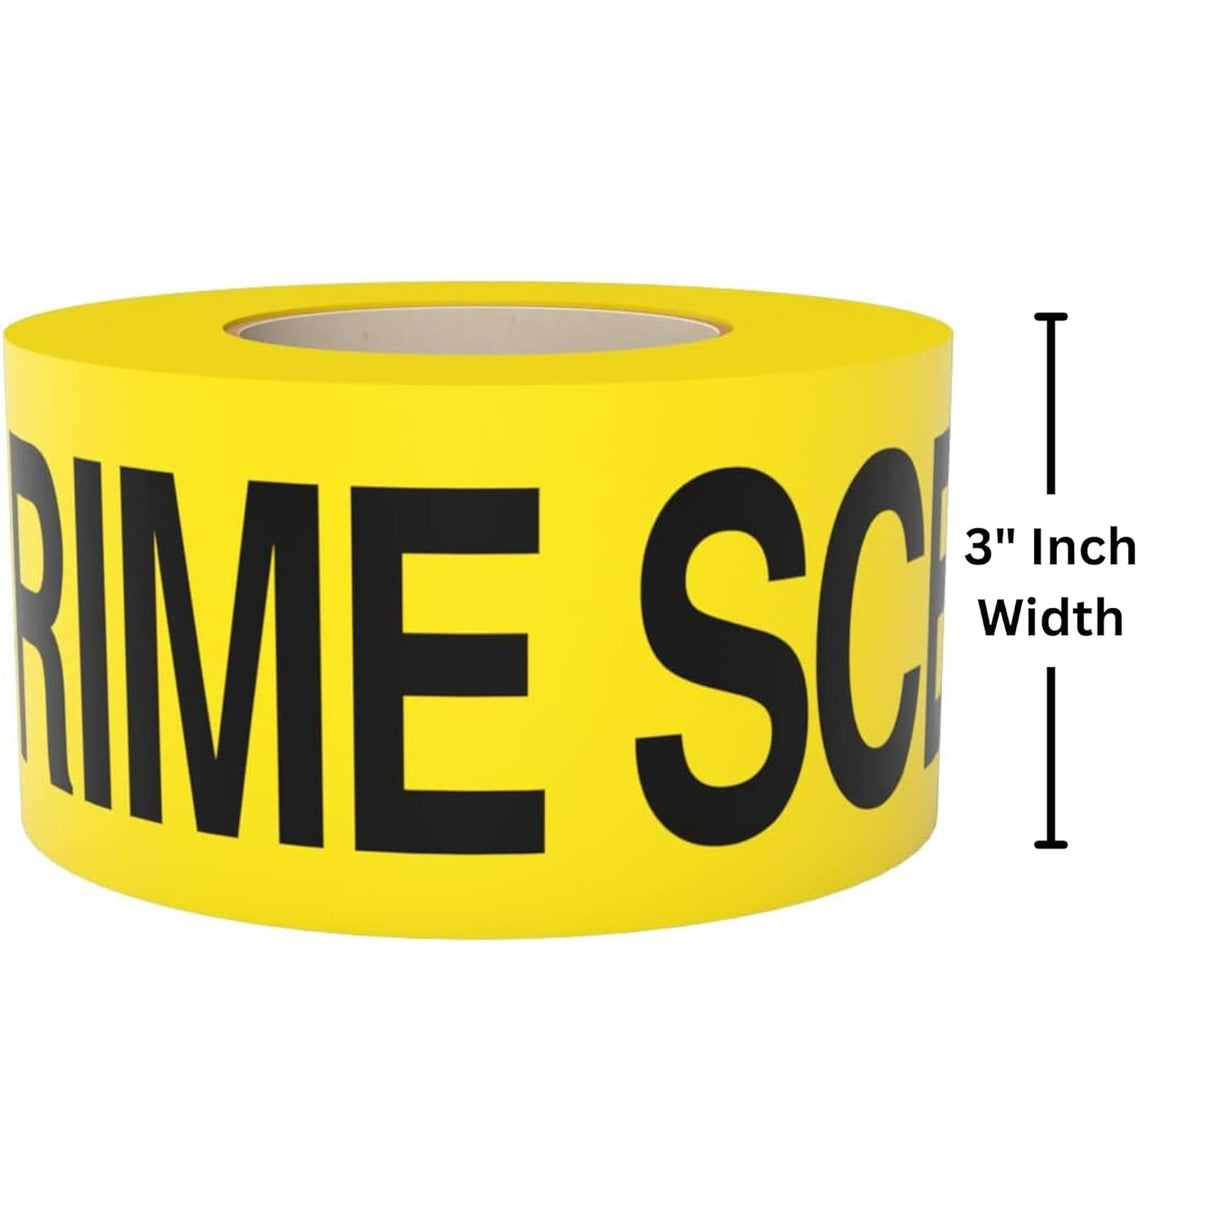 SINGHAL Crime Scene Do Not Cross Barricade Tape Roll, 3 Inch x 300 Meter, High Visibility Bright Yellow Tape with Bold Black Print, Maximum Readability (Pack of 3)